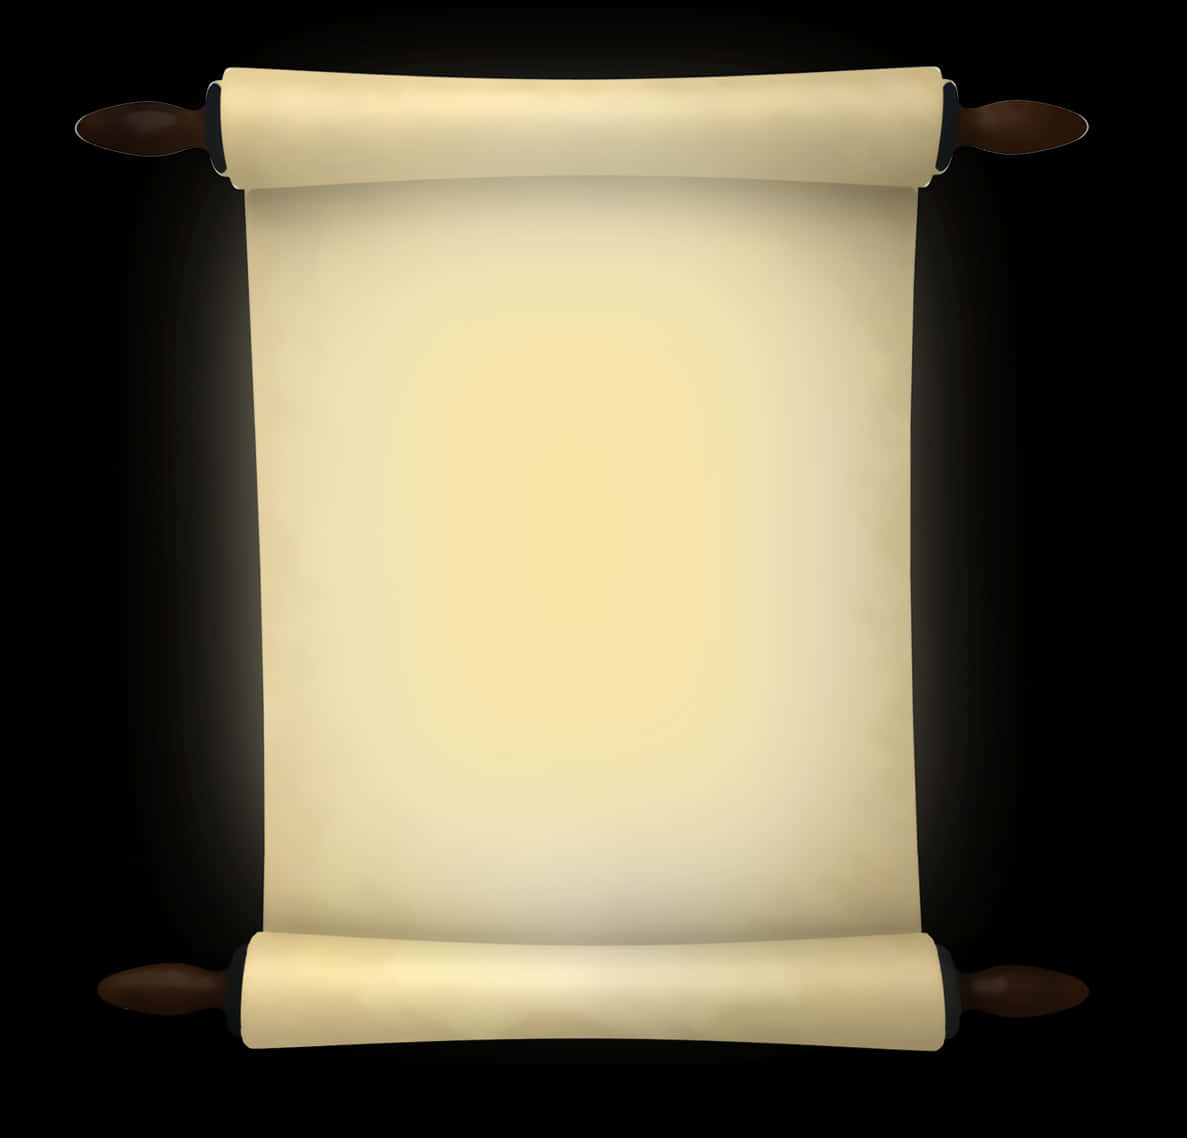 A Scroll Of Paper With Wooden Handles